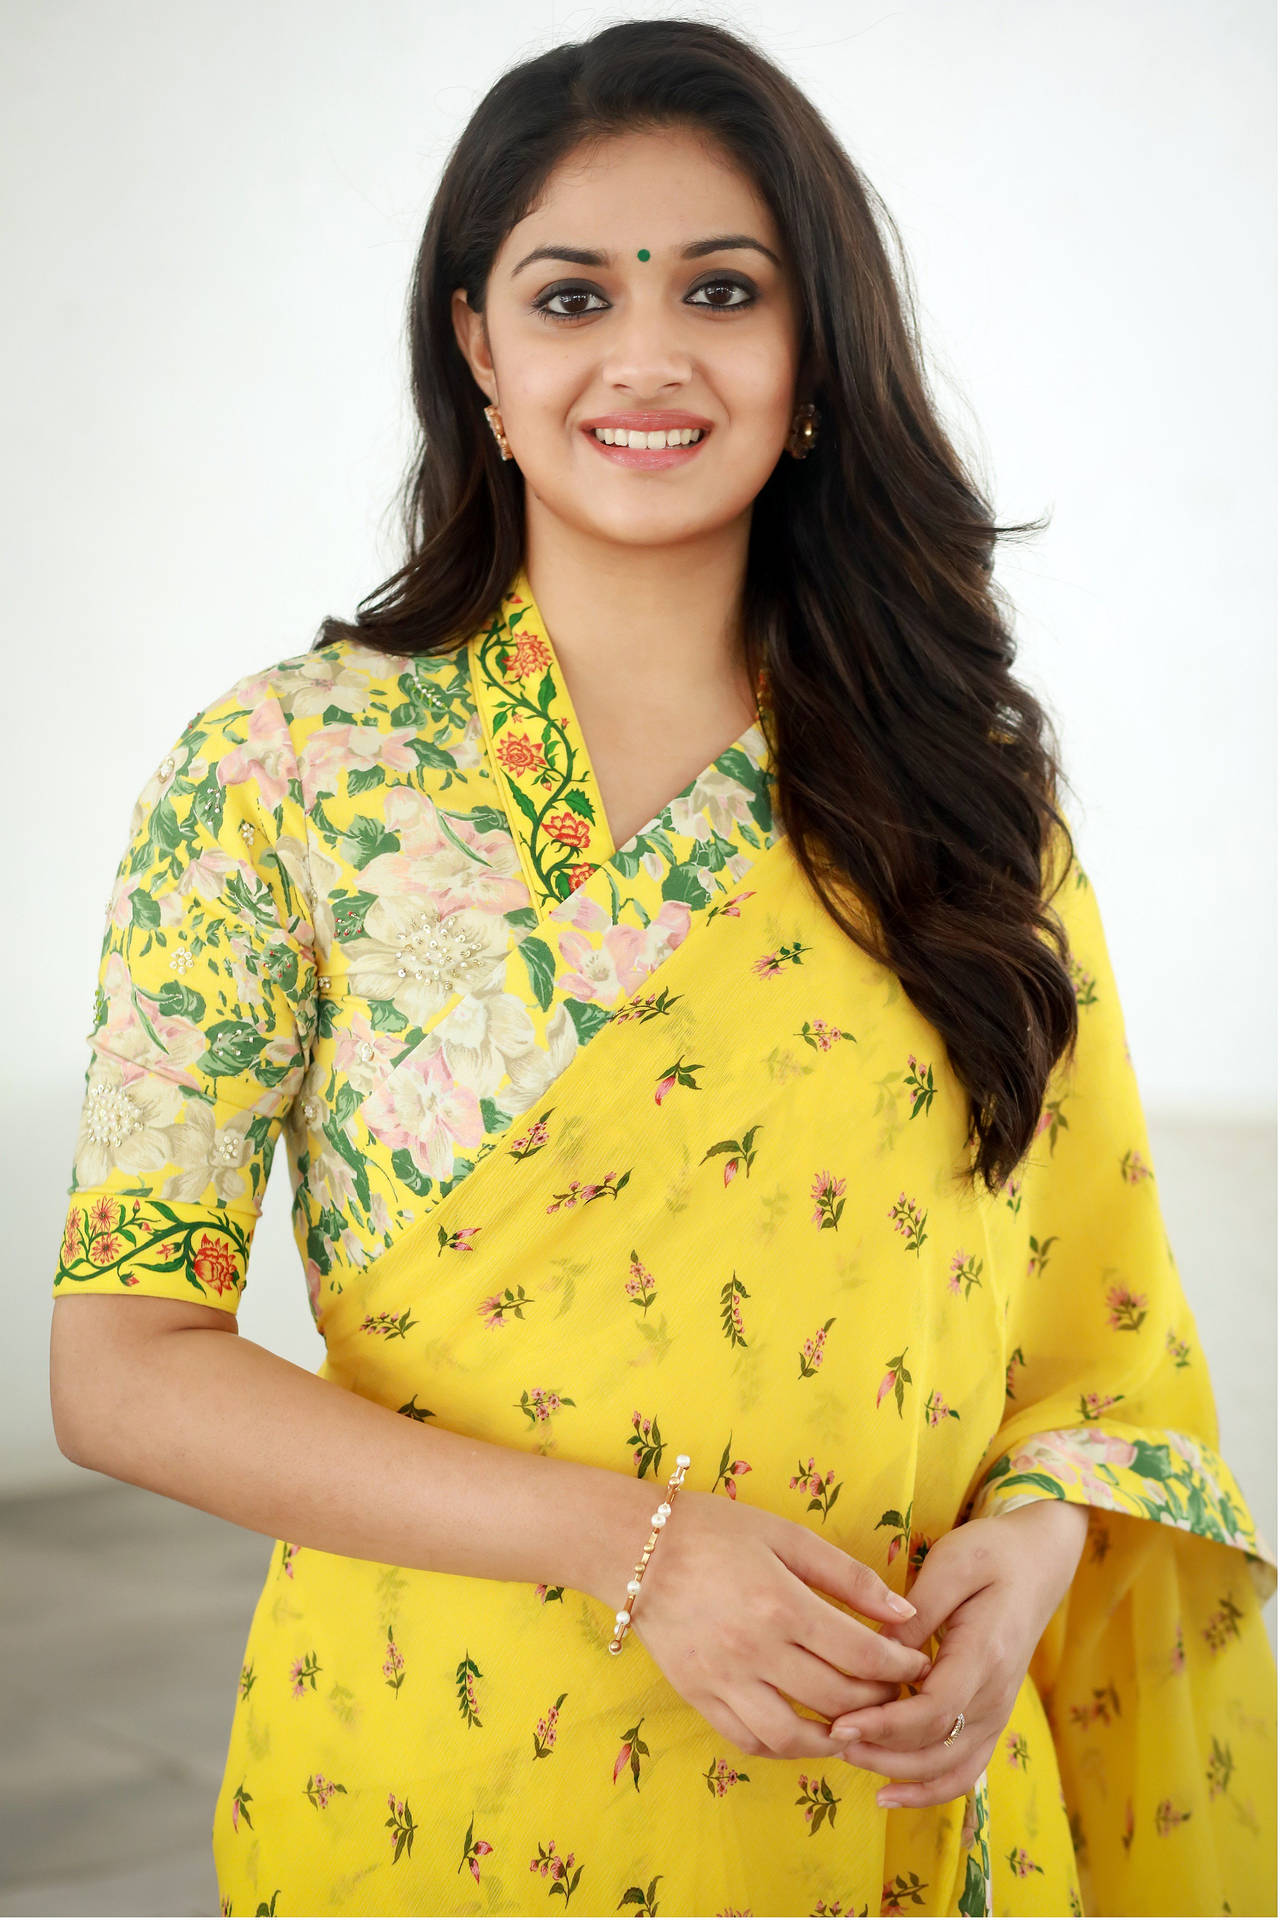 Vibrant Elegance - Keerthi Suresh In A Stunning Yellow Floral Saree Background